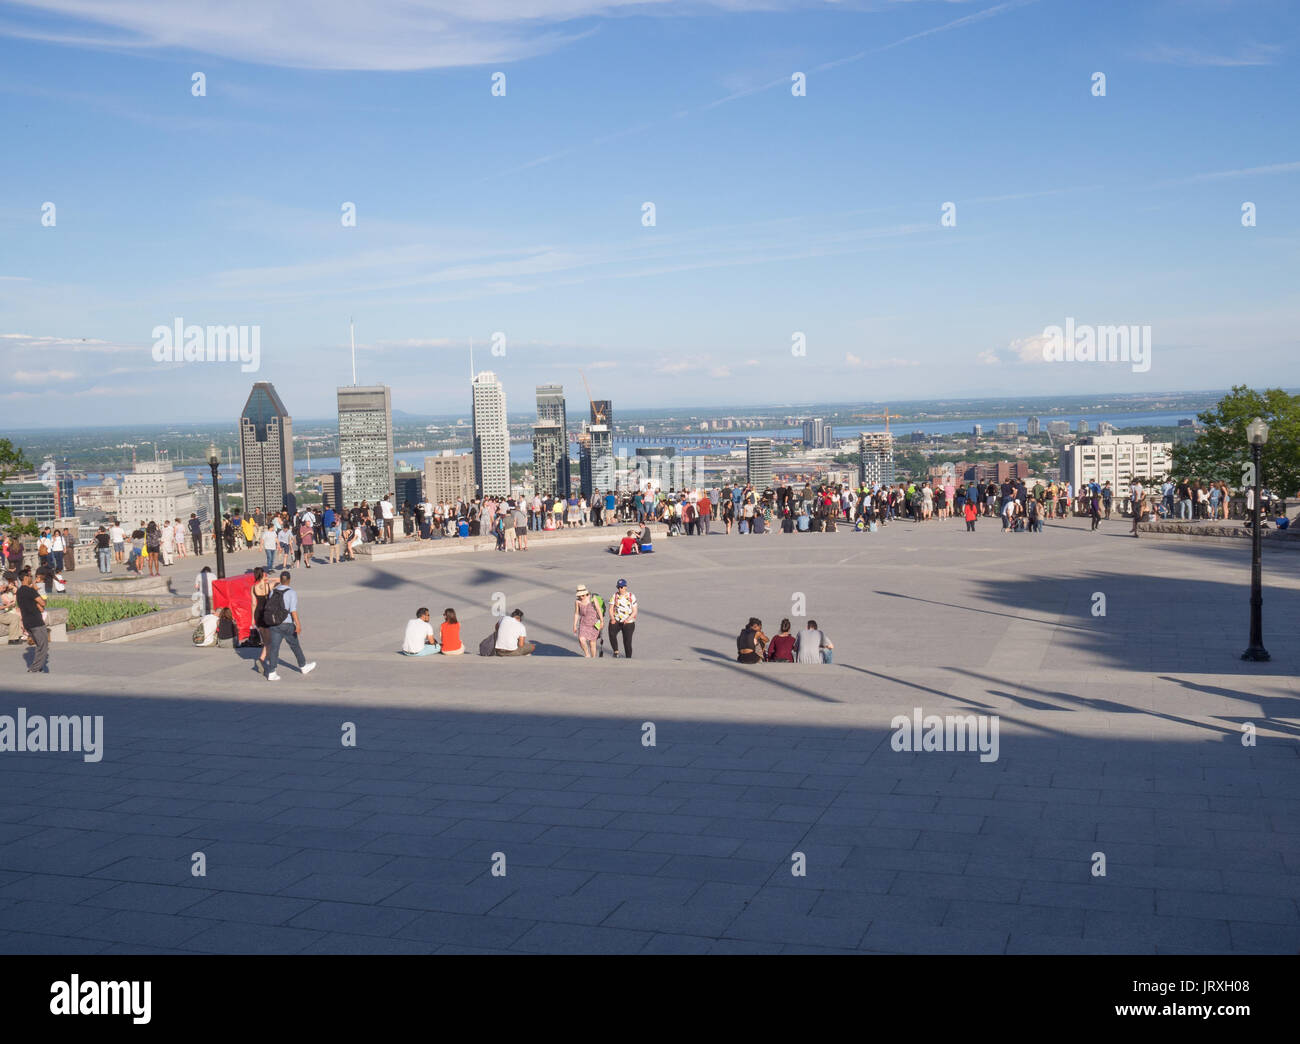 Tourists enjoying the view of downtown Montreal, Quebec City, Canada skyline from an overlook during daytime in summer Stock Photo